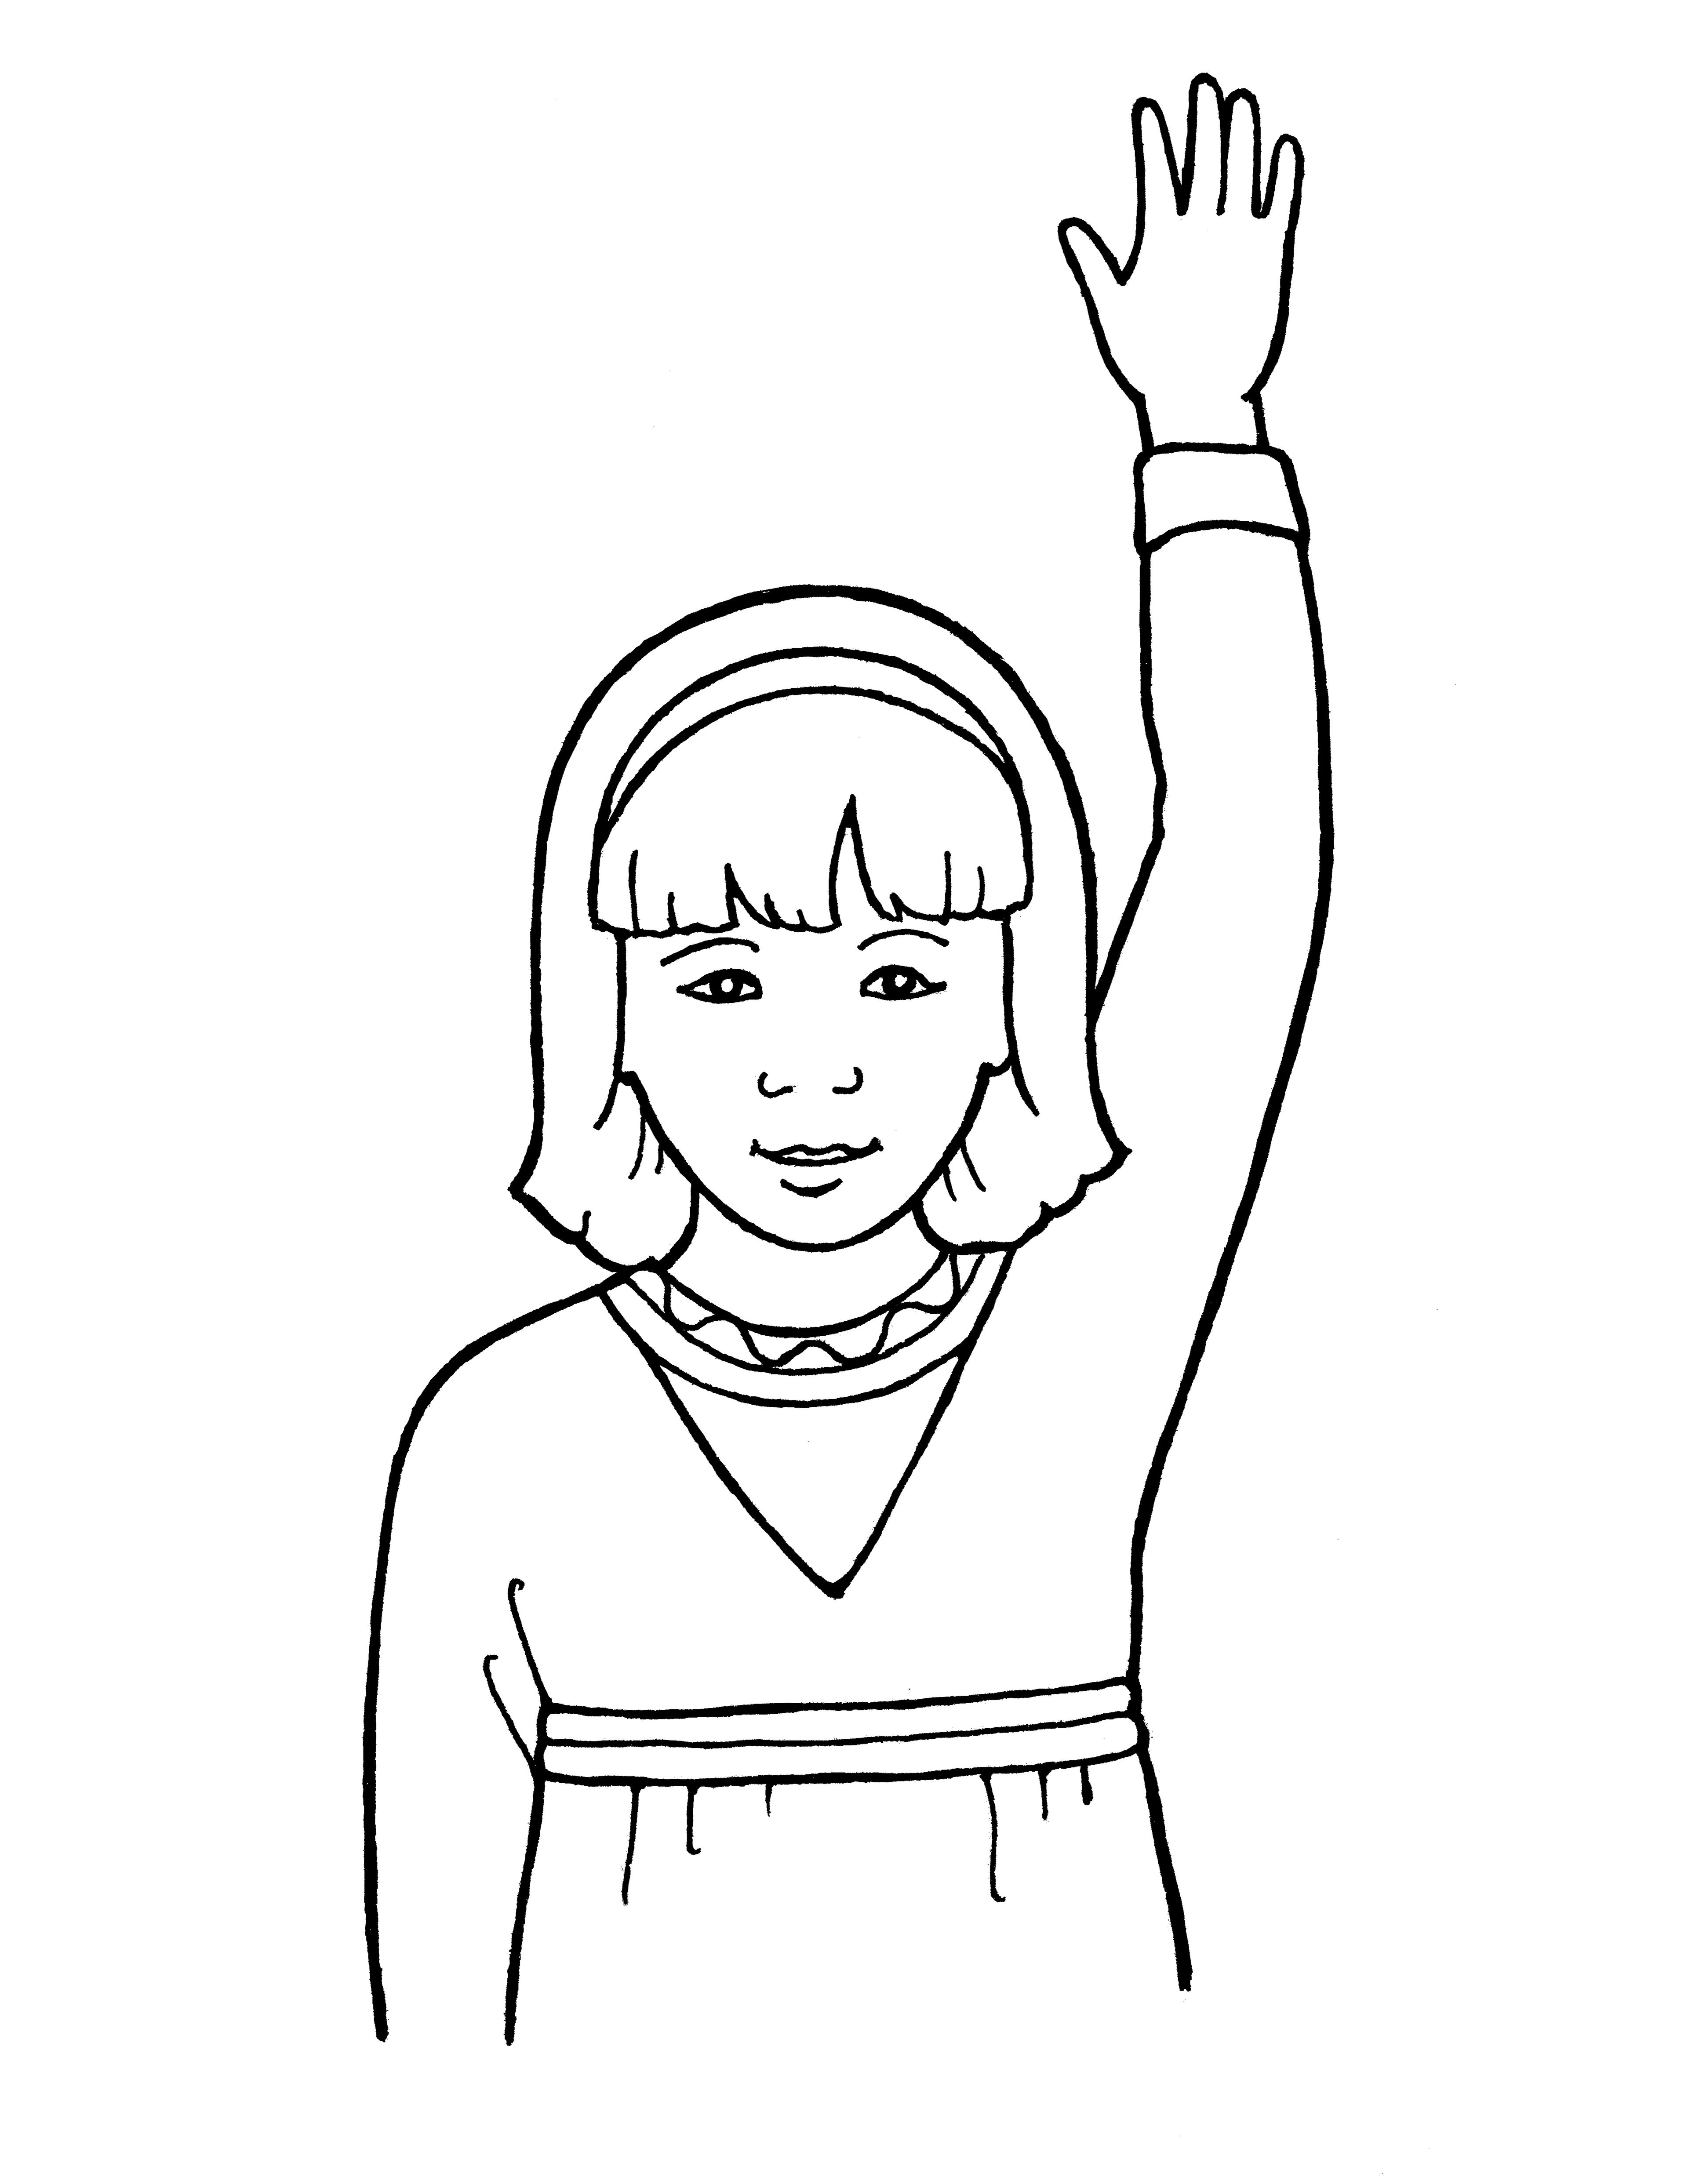 An illustration of a young girl reverently raising her hand.